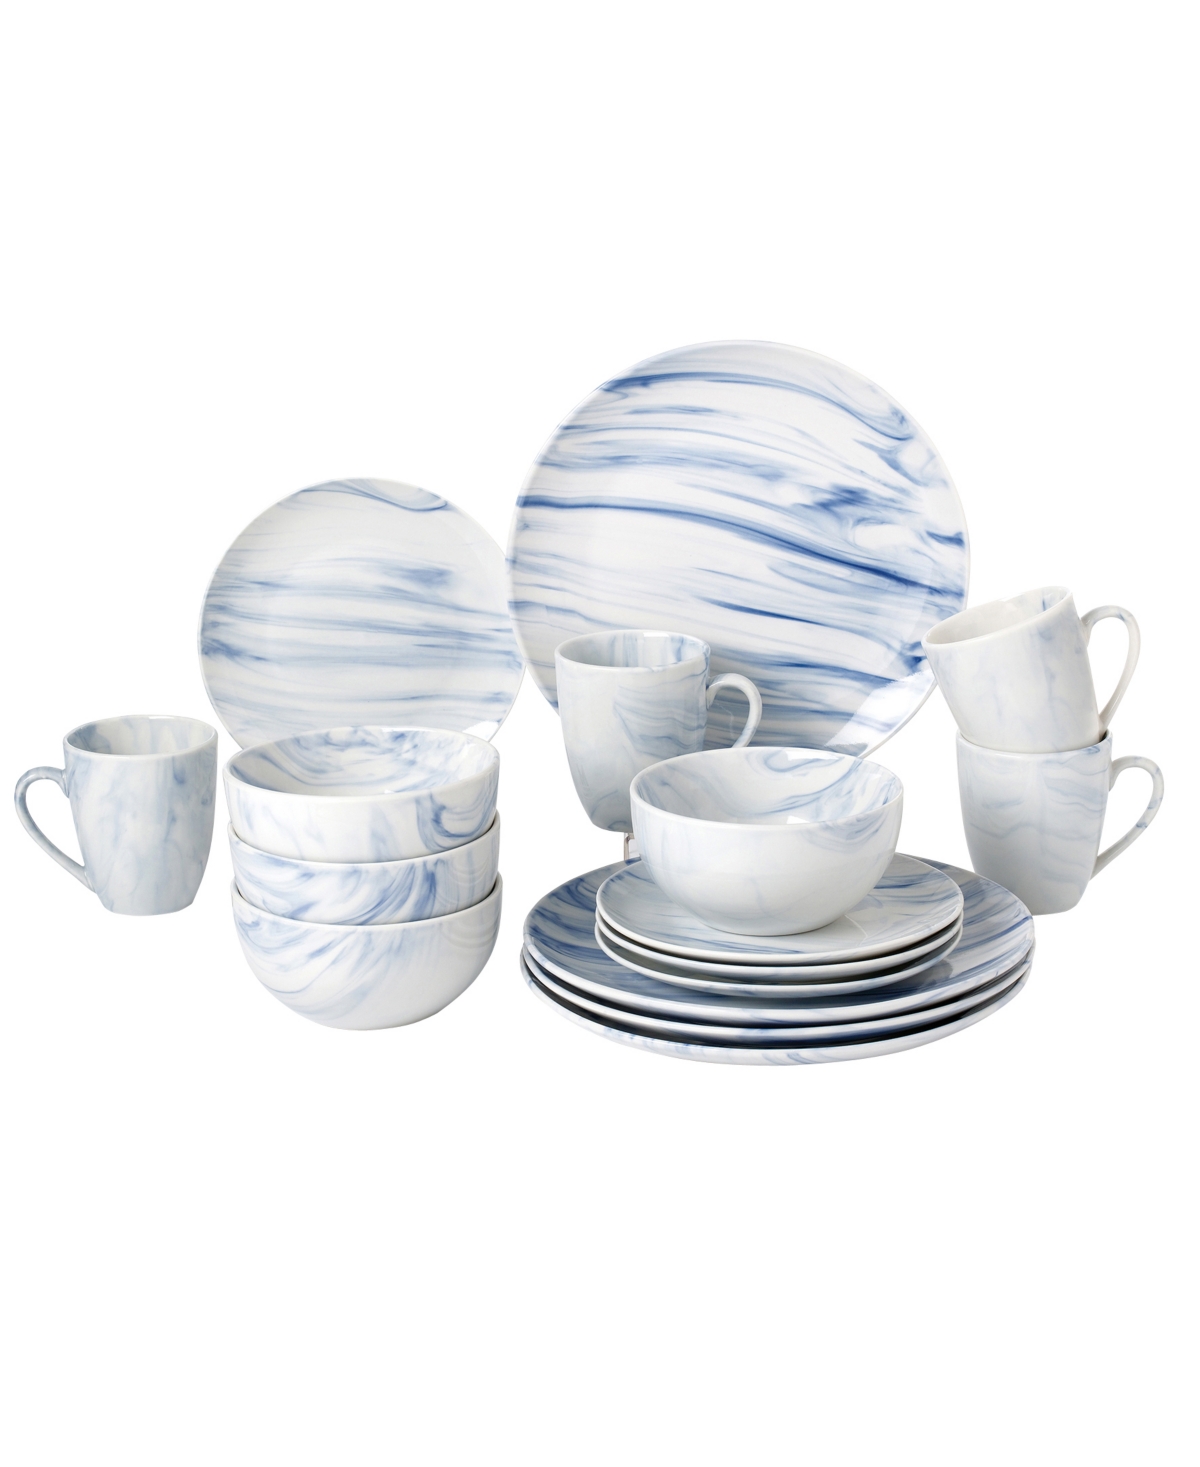 Marble 16 Piece Service for 4 Dinnerware Set - Blue